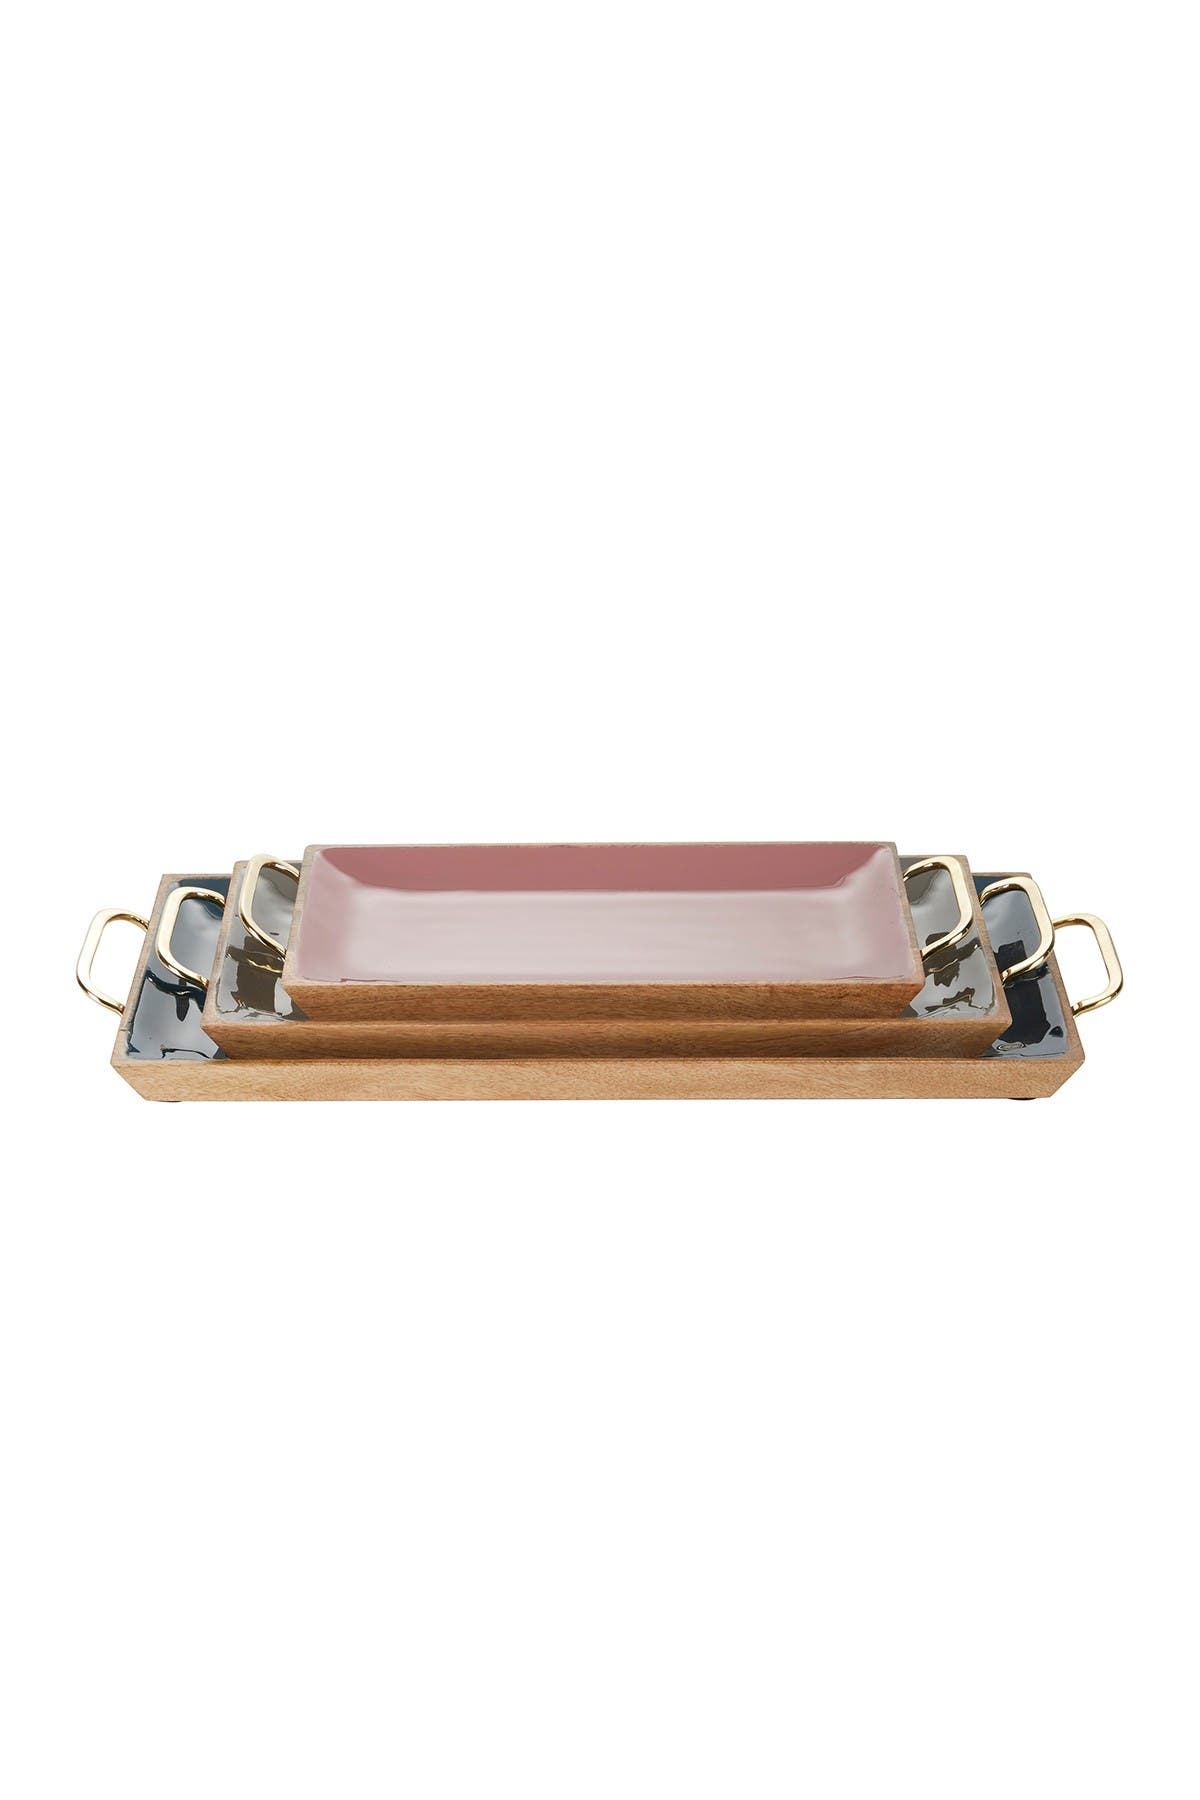 Willow Row Multi Colored Enamel Wood Contemporary Tray